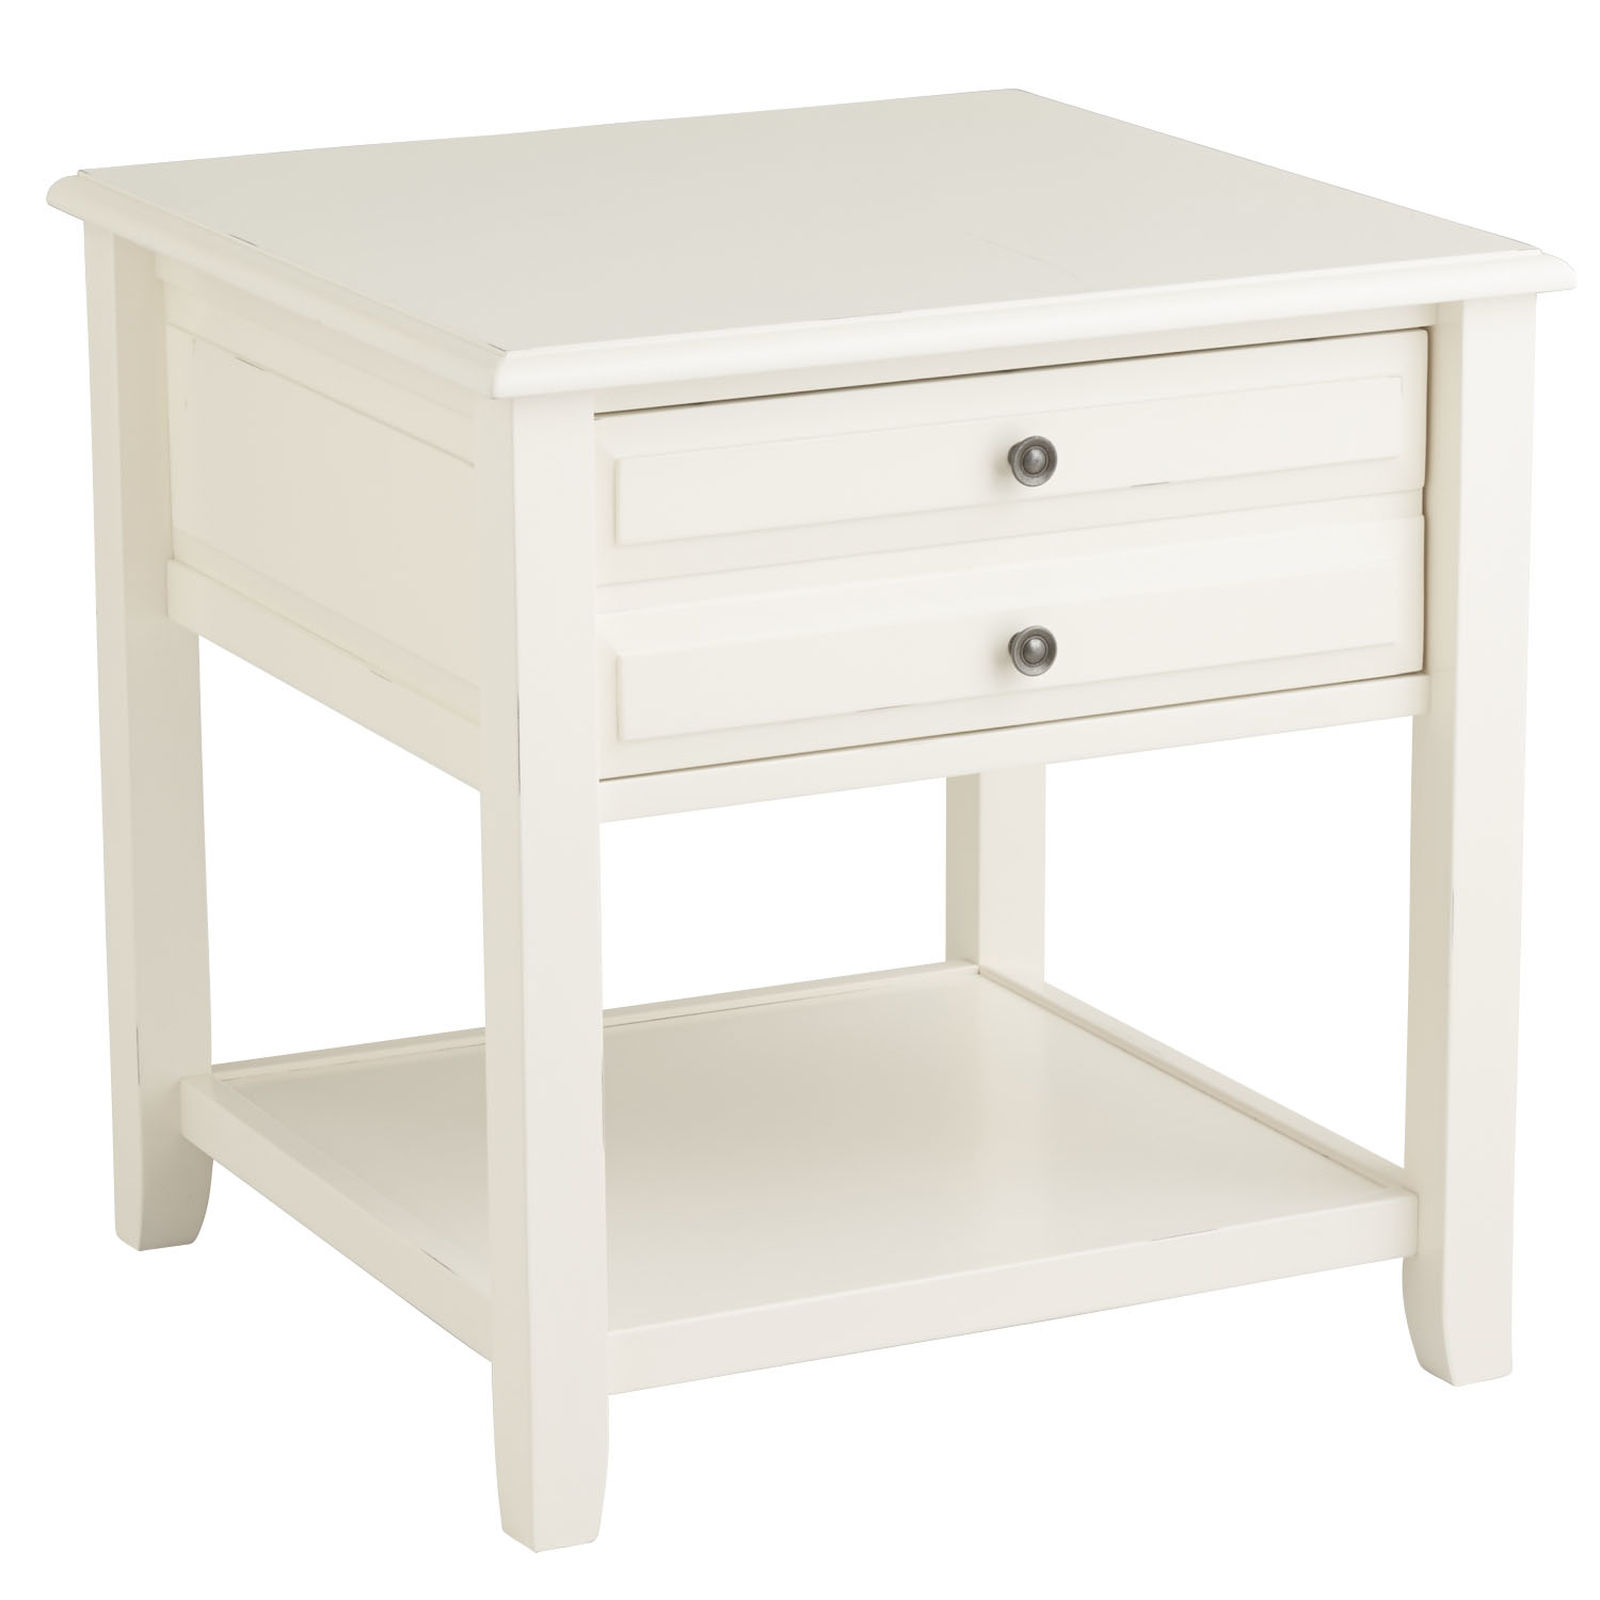 attractive ideas white end tables intended for anywhere large antique table with knobs pier imports living room ikea bedroom accent threshold teal ethan allen painted furniture